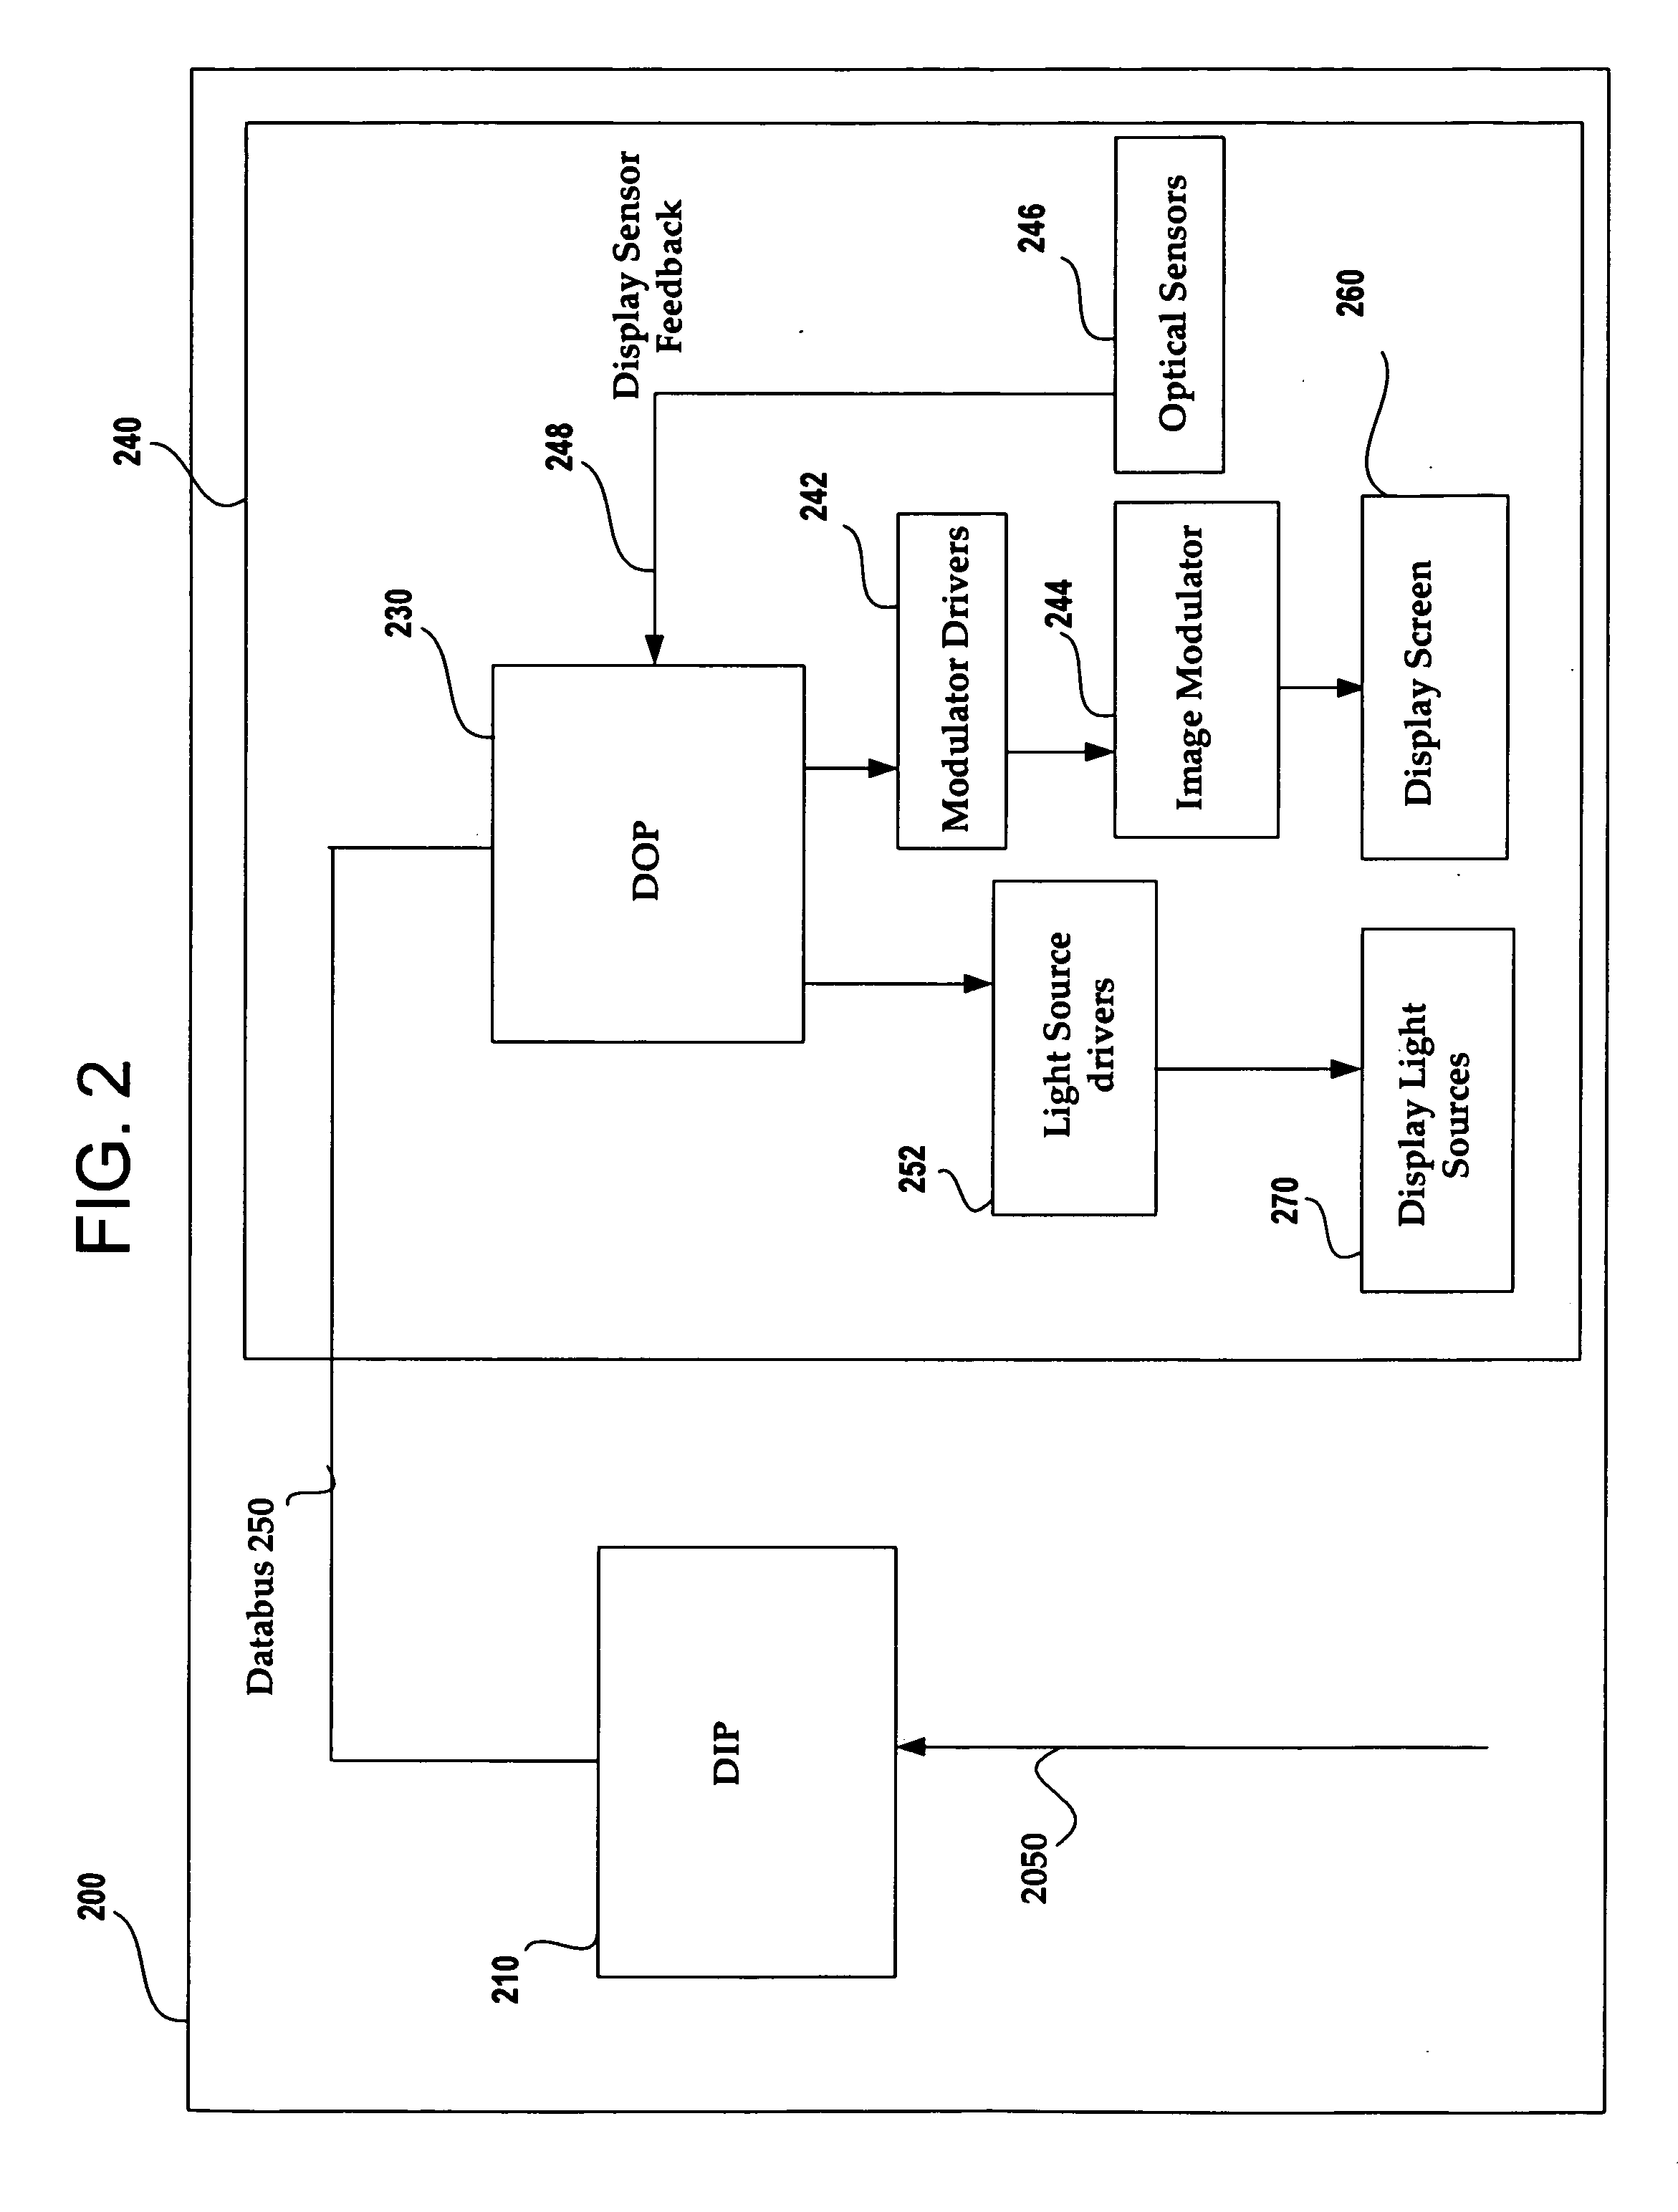 Image and light source modulation for a digital display system